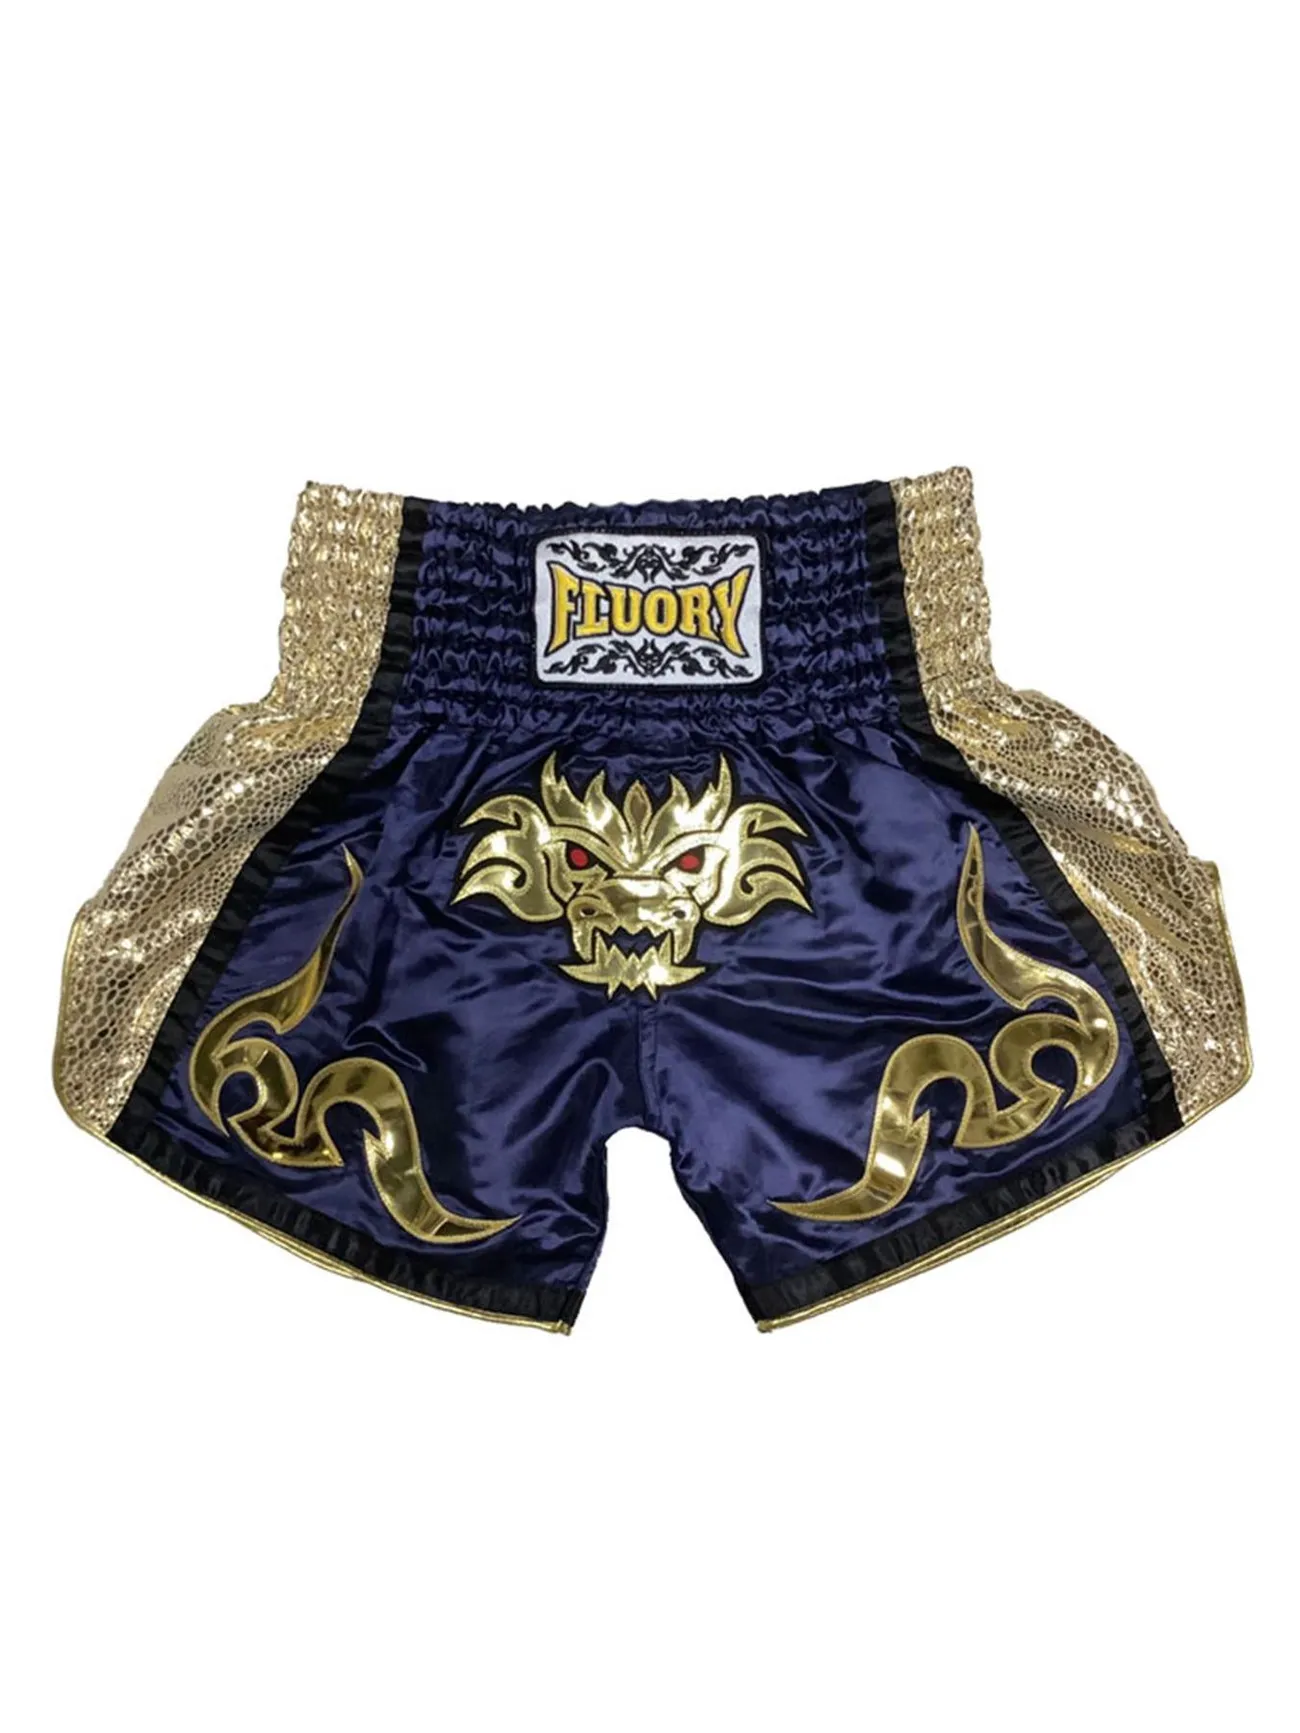 Fluory Muay Thai Shorts Embroidered Sports Trunks For Boxing Fighting Training - Sports & Outdoors Philippines